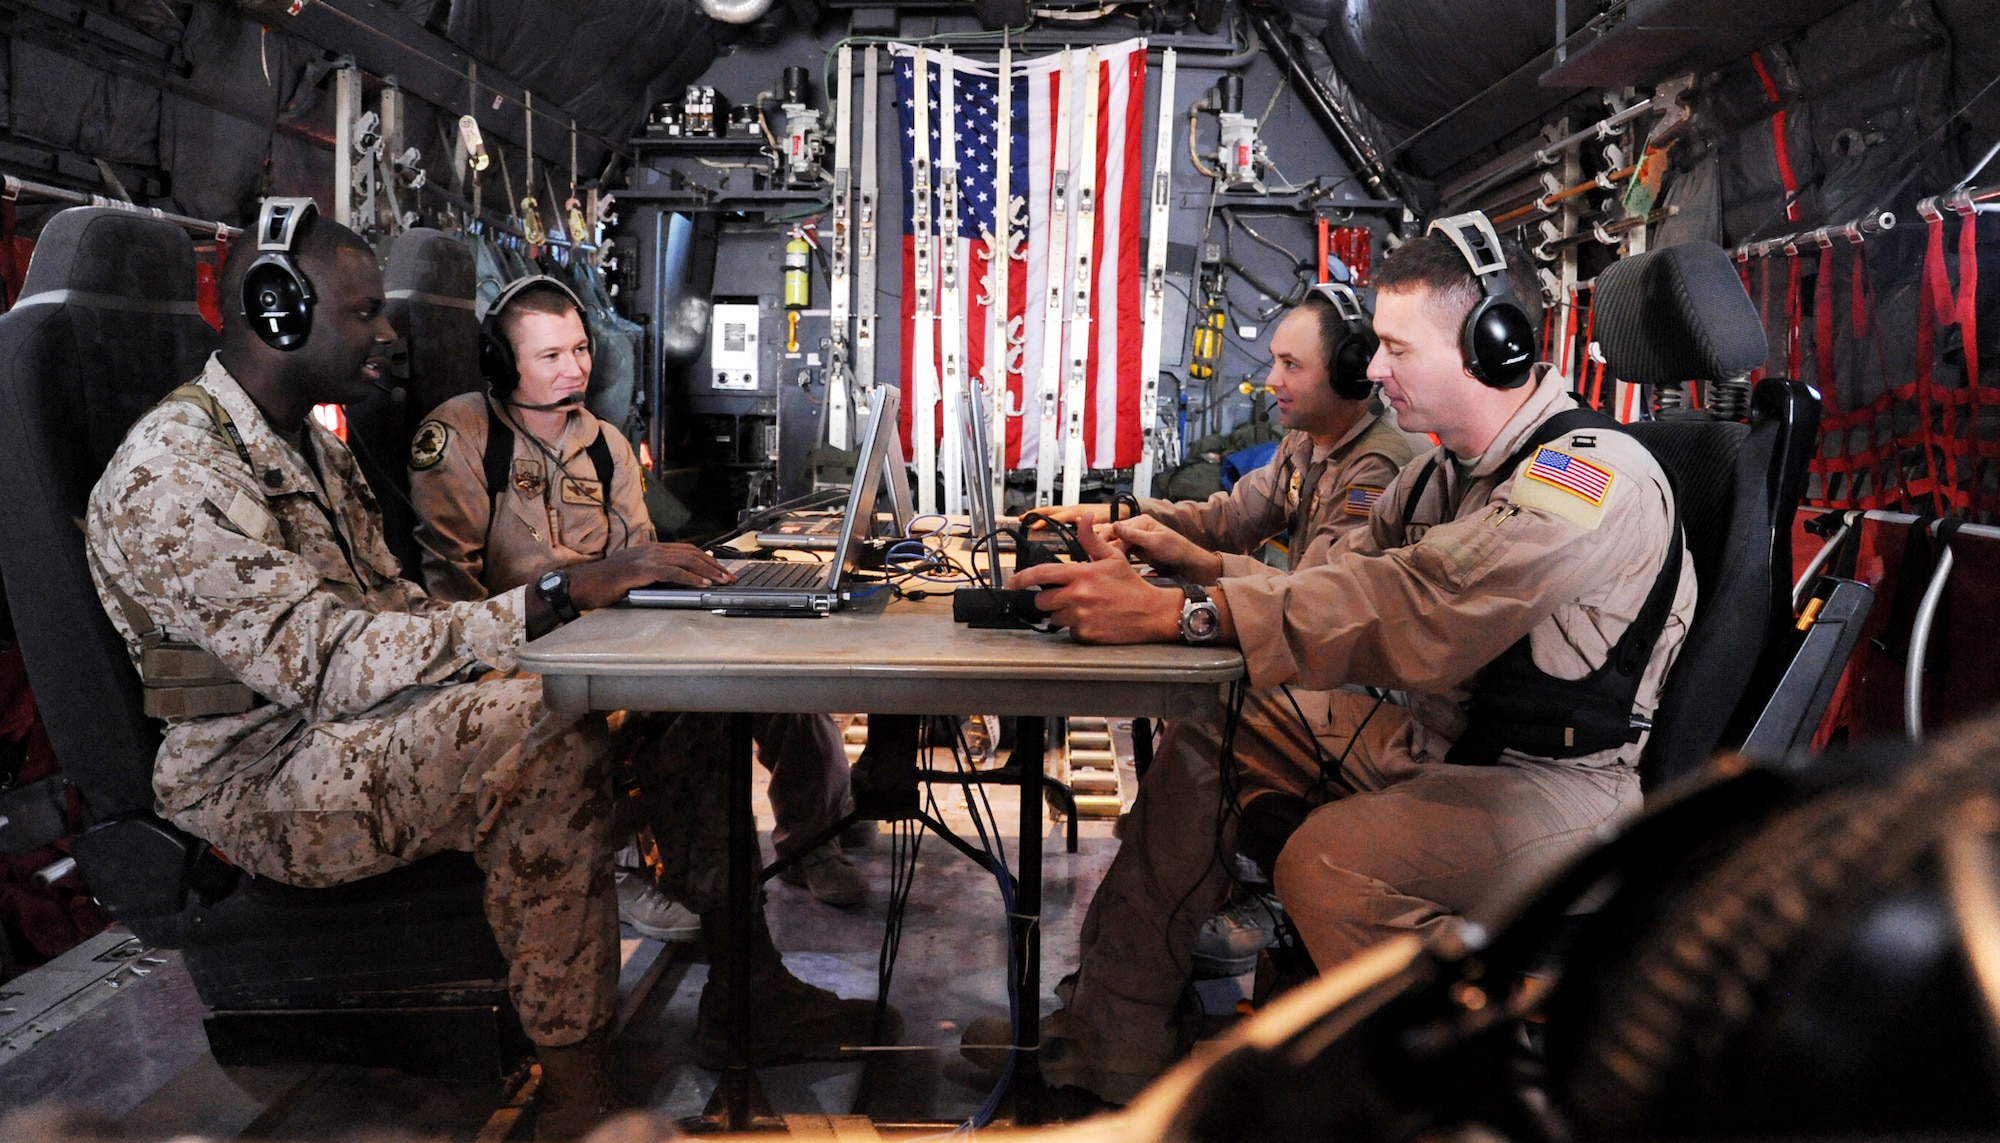 Servicemembers from the 777th Expeditionary Airlift Squadron joint airborne battle staff detachment prepare for a mission on a C-130 Hercules Nov. 24, 2009 at Joint Base Balad, Iraq. The JABS is a joint operation focused on providing airborne communications support to ground forces. (U.S. Air Force photo/Senior Airman Christopher Hubenthal)